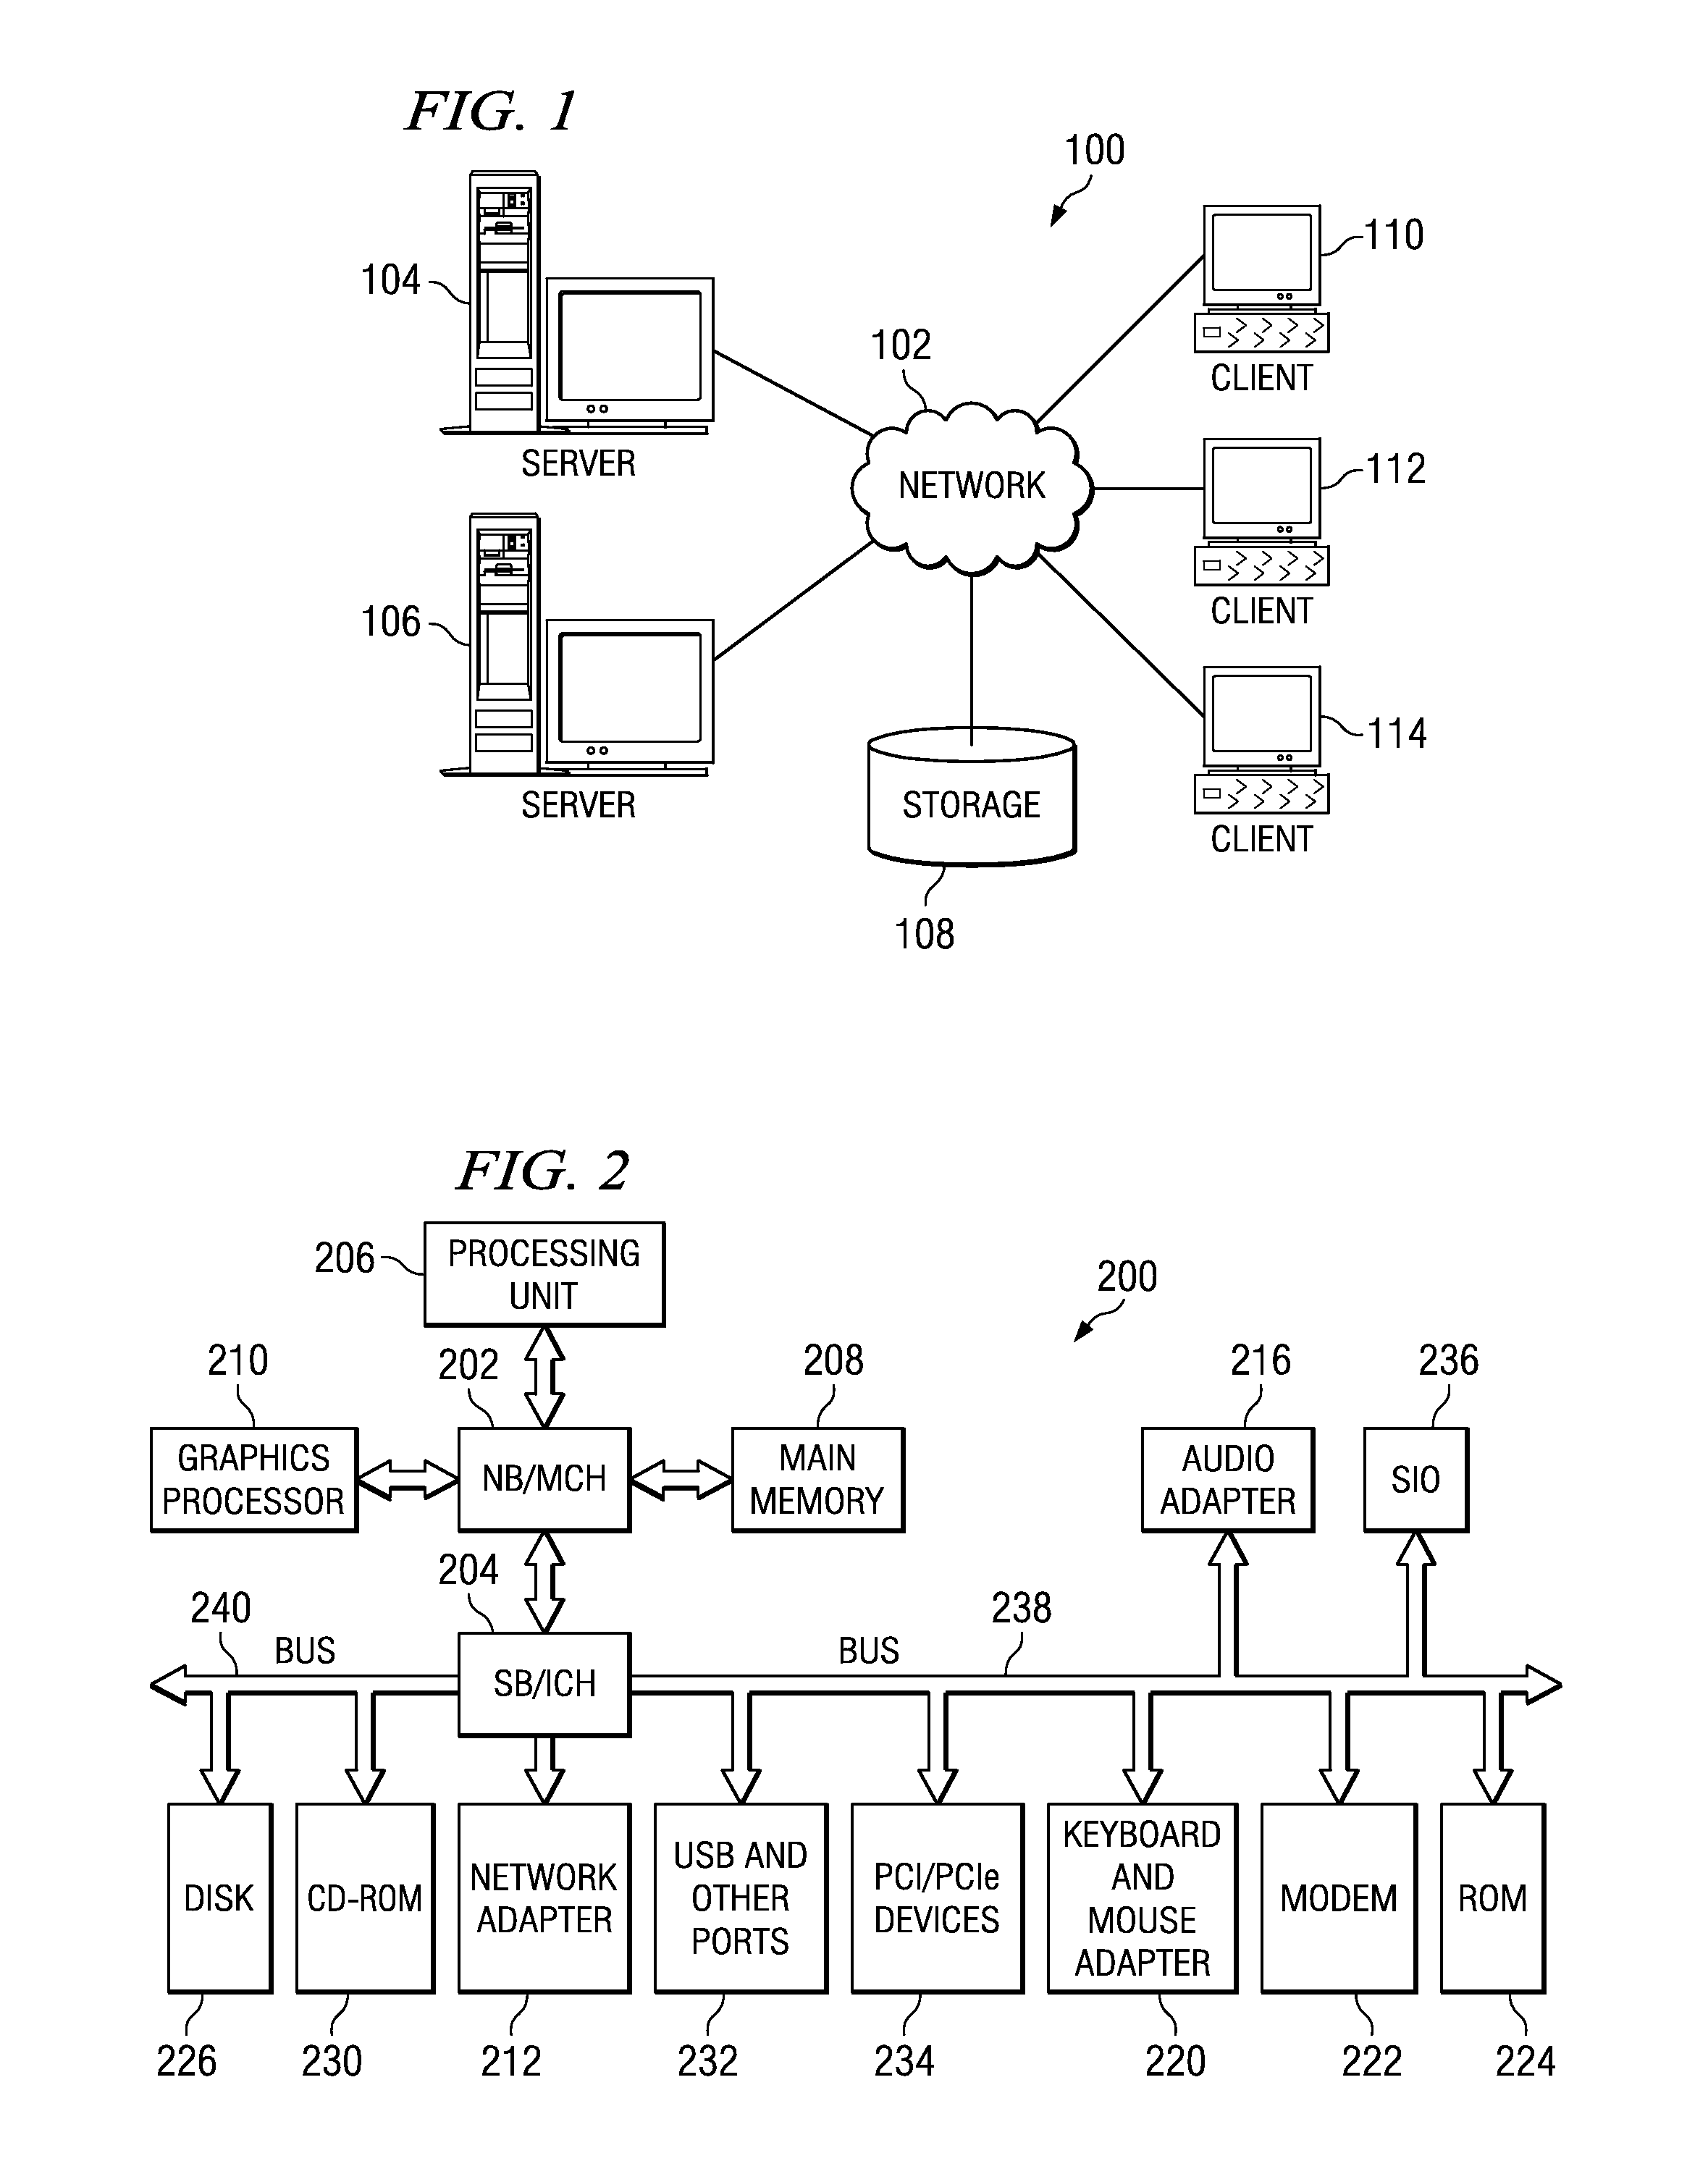 Transparent aware data transformation at file system level for efficient encryption and integrity validation of network files